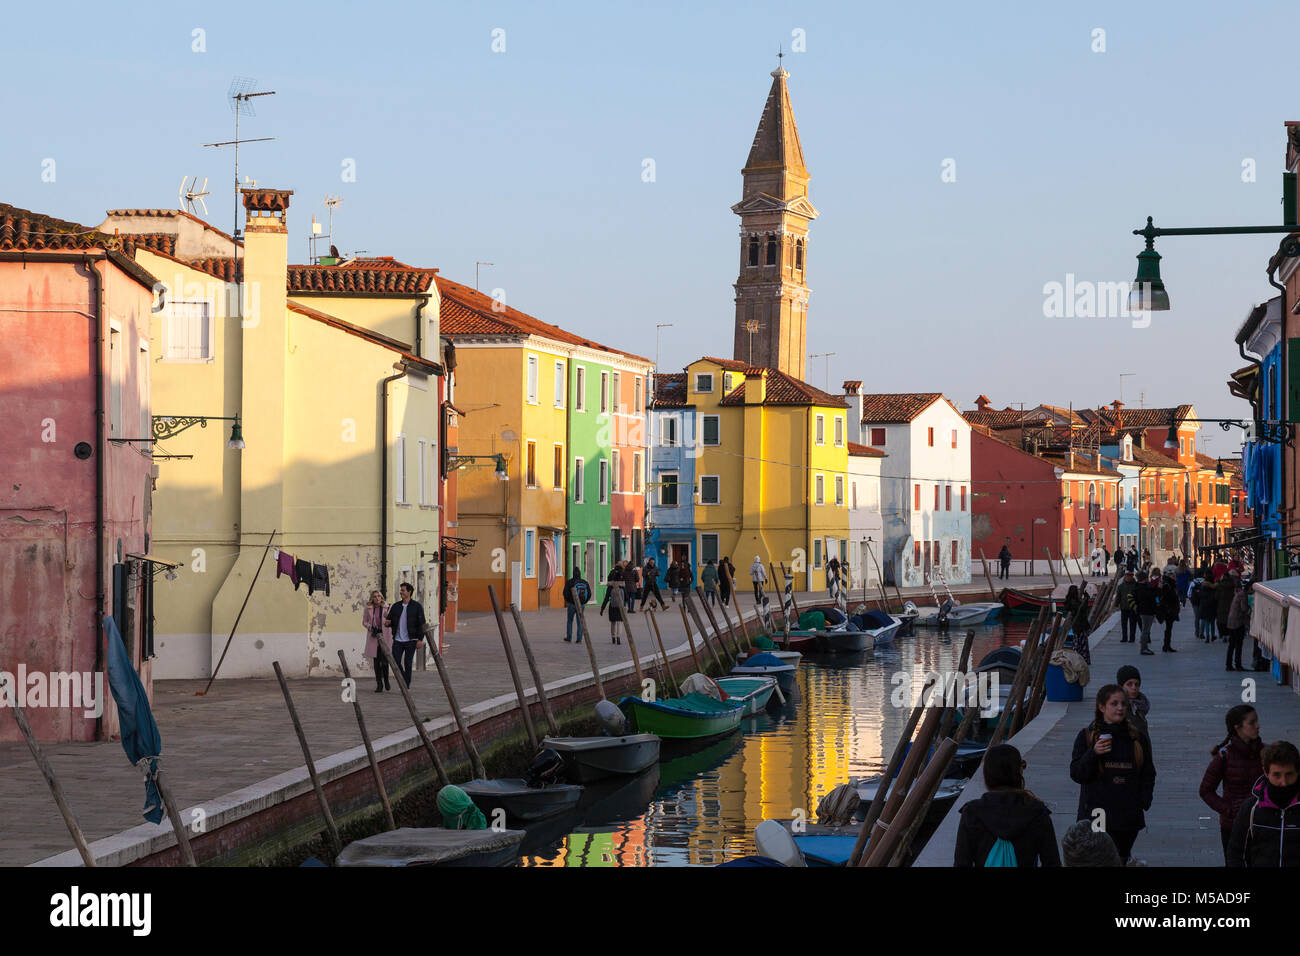 The bell tower of San martino Church at sunset, Burano Island, Venice,Veneto, Italy with reflections on the canal and people walking on Fondamenta Pes Stock Photo